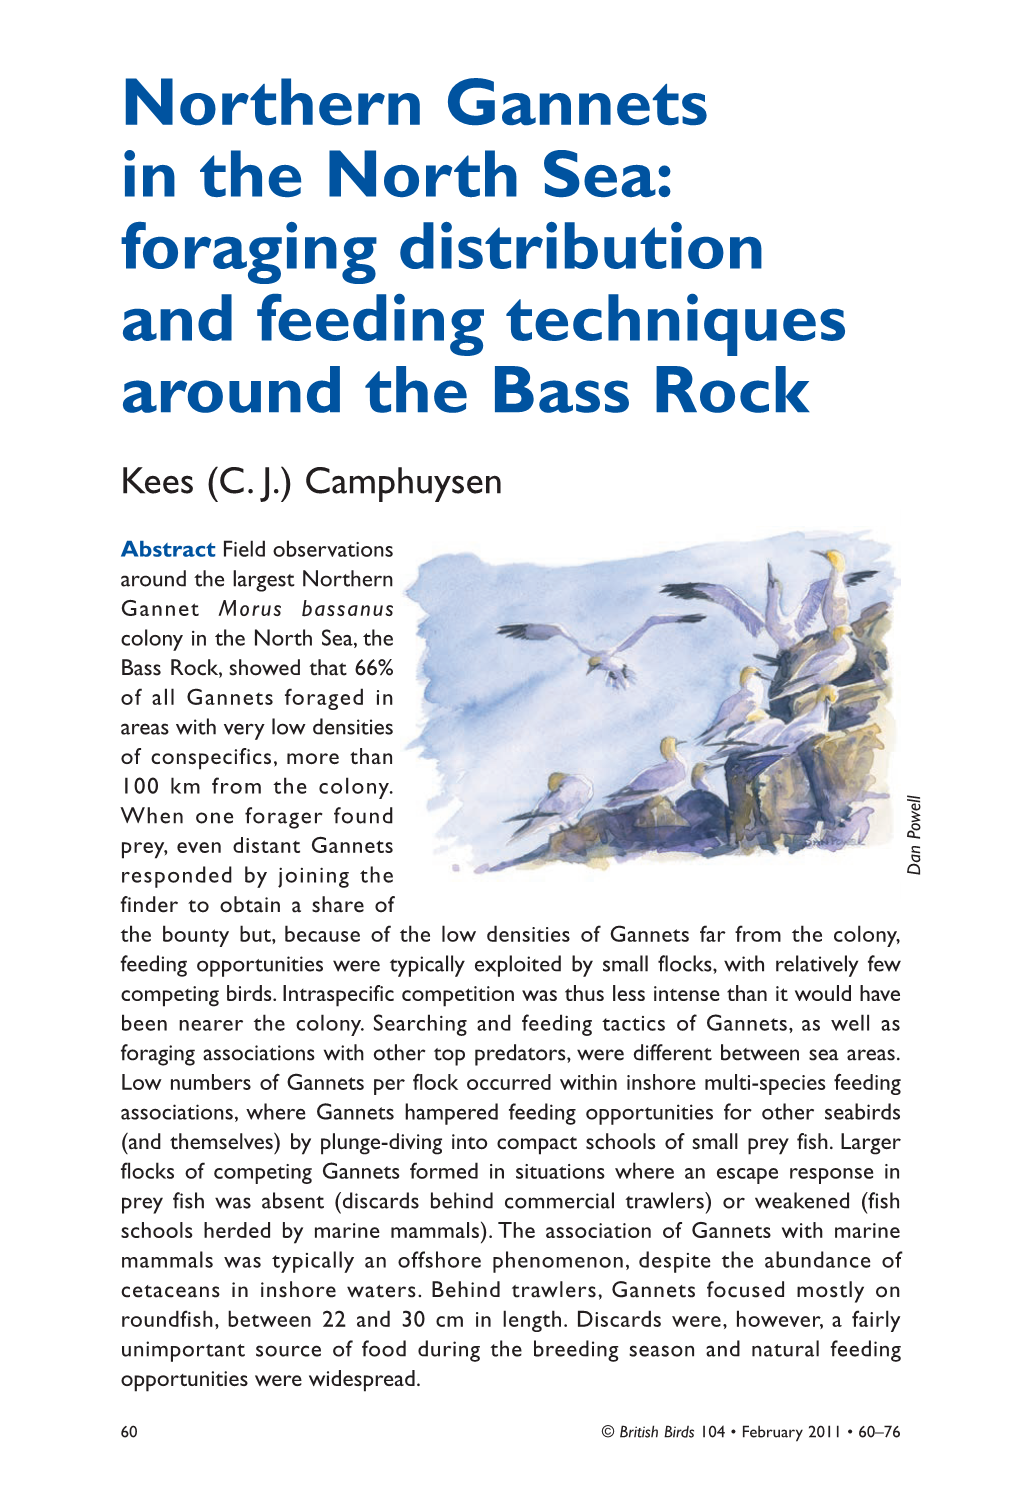 Northern Gannets in the North Sea: Foraging Distribution and Feeding Techniques Around the Bass Rock Kees (C